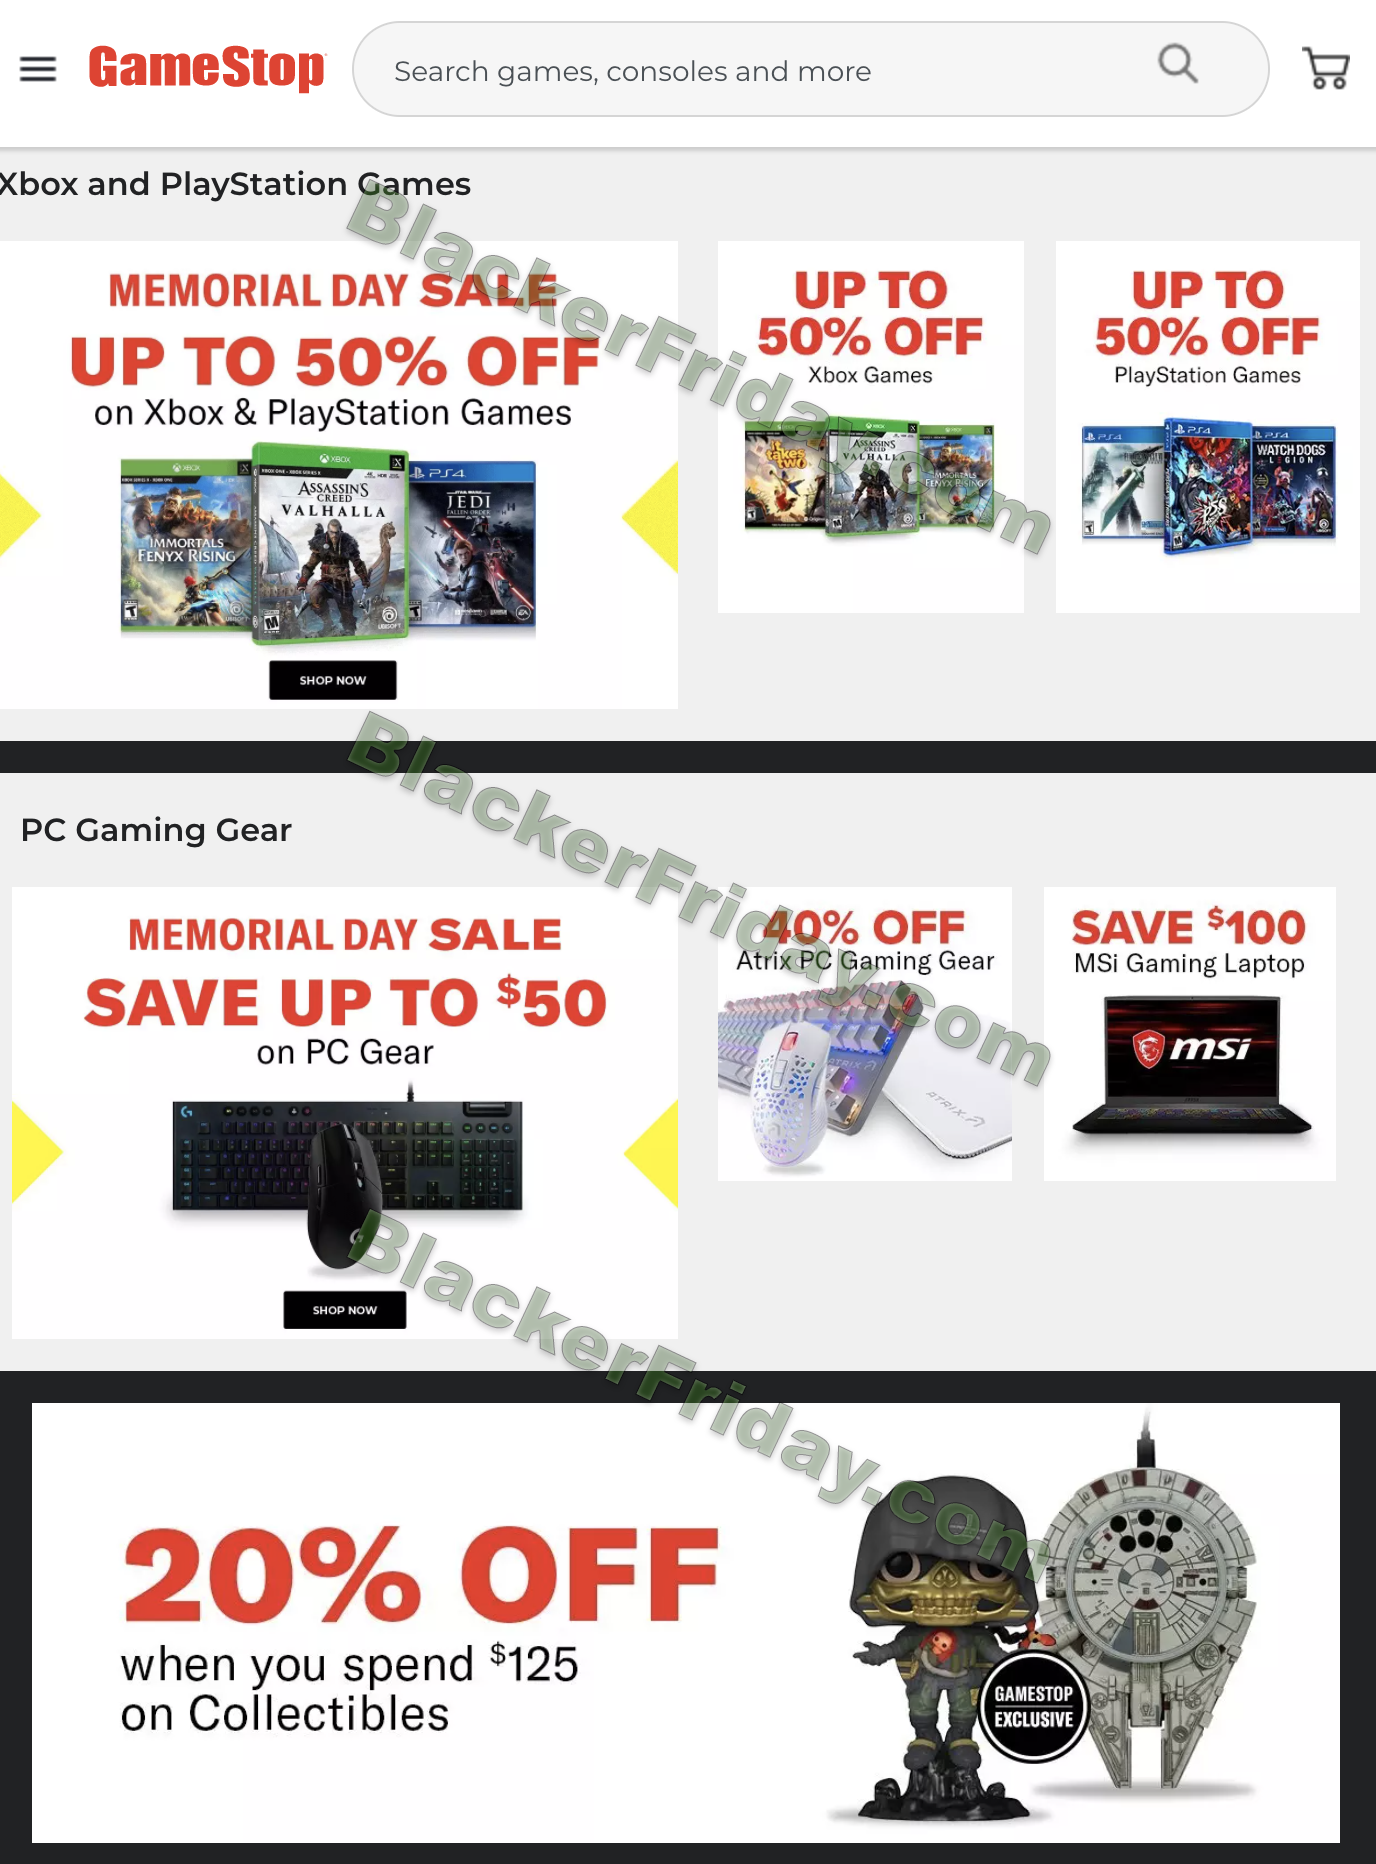 GameStop Memorial Day 2022 Sale What to Expect Blacker Friday